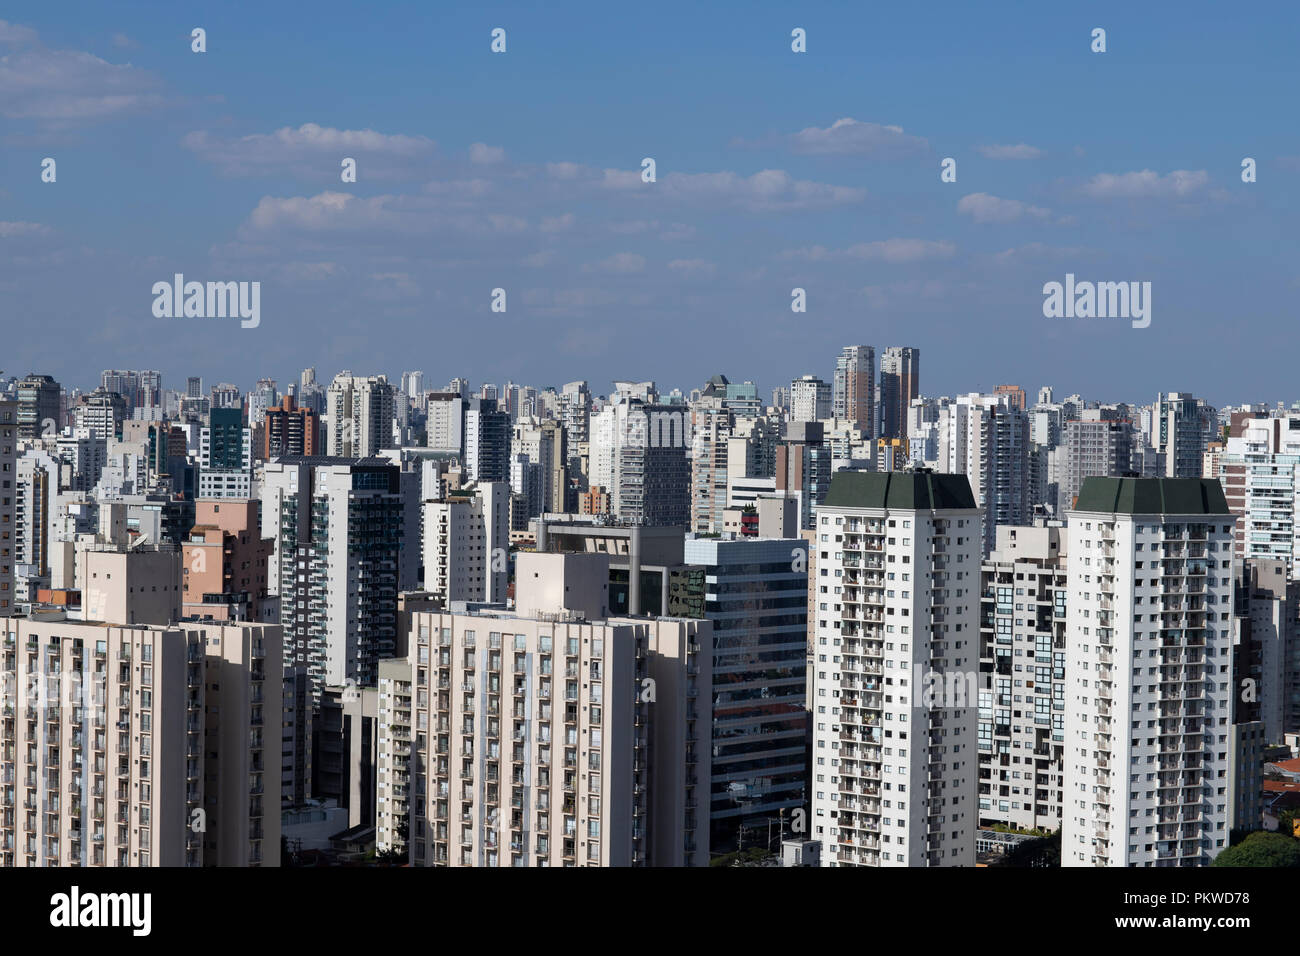 Large buildings in the big city. Sao Paulo state, Brazil in South America. Stock Photo